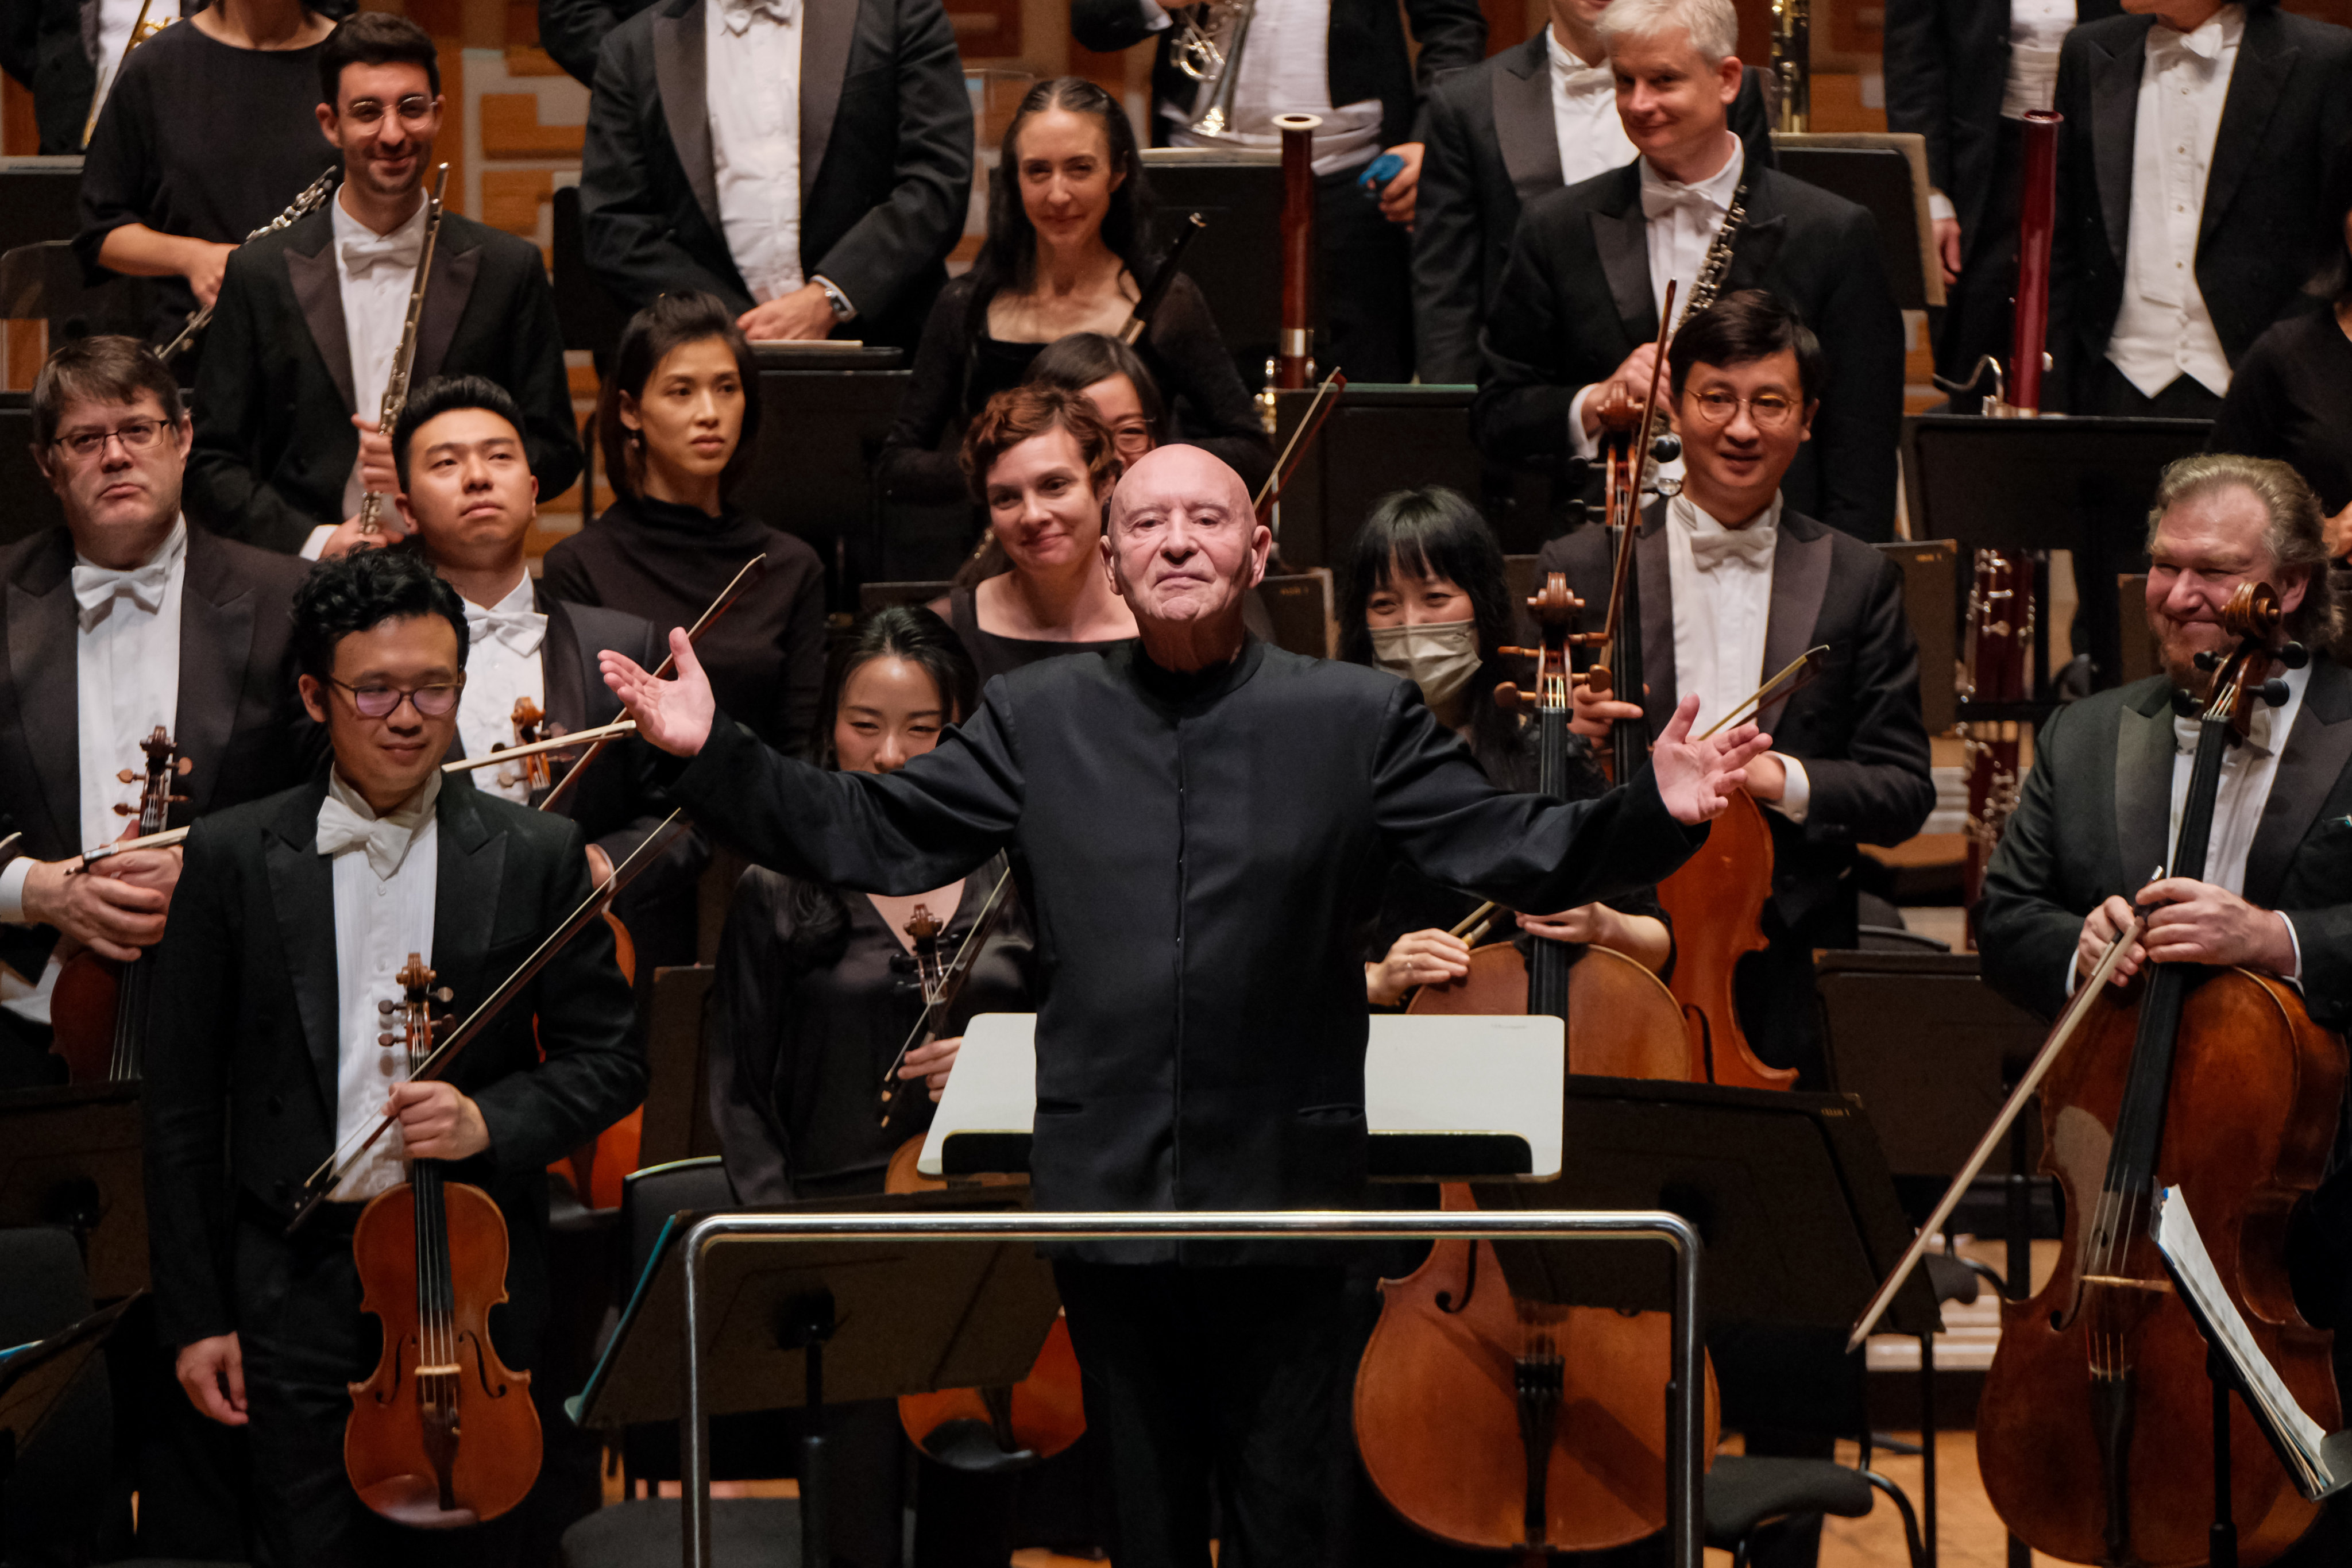 Christoph Eschenbach and the Hong Kong Philharmonic Orchestra receive the applause of the audience at the Hong Kong Cultural Centre Concert Hall on March 31 after their performance of Anton Bruckner’s Symphony No 4. Photo: HK Phil/Ka Lam